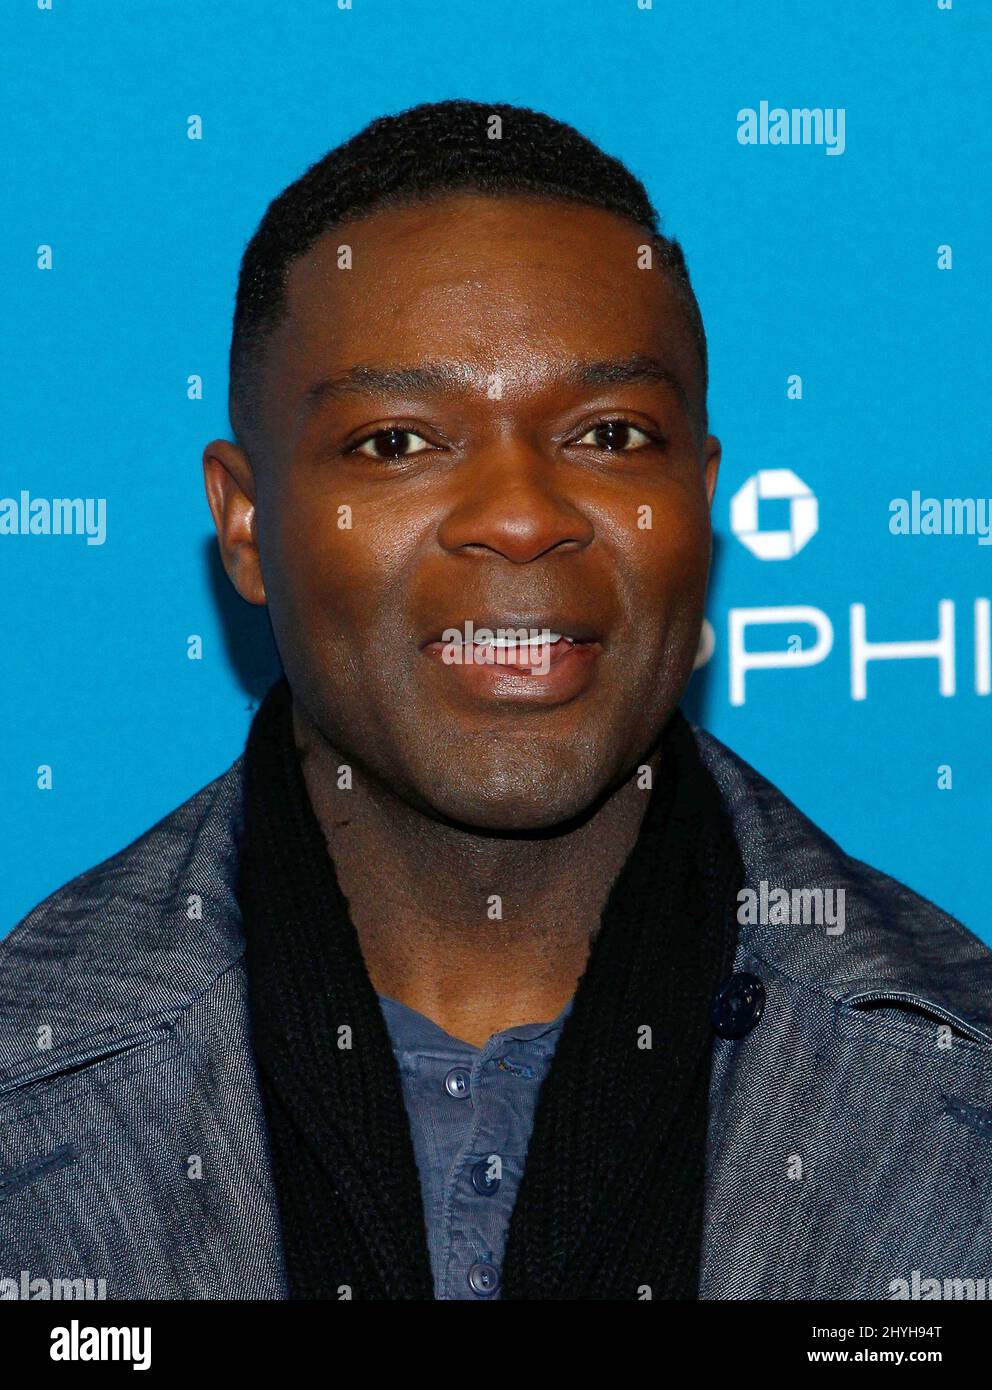 David Oyelowo at the premiere of 'After The Wedding' during the 2019 Sundance Film Festival held at the Eccles Theatre on January 24, 2019 in Park City, UT. Stock Photo